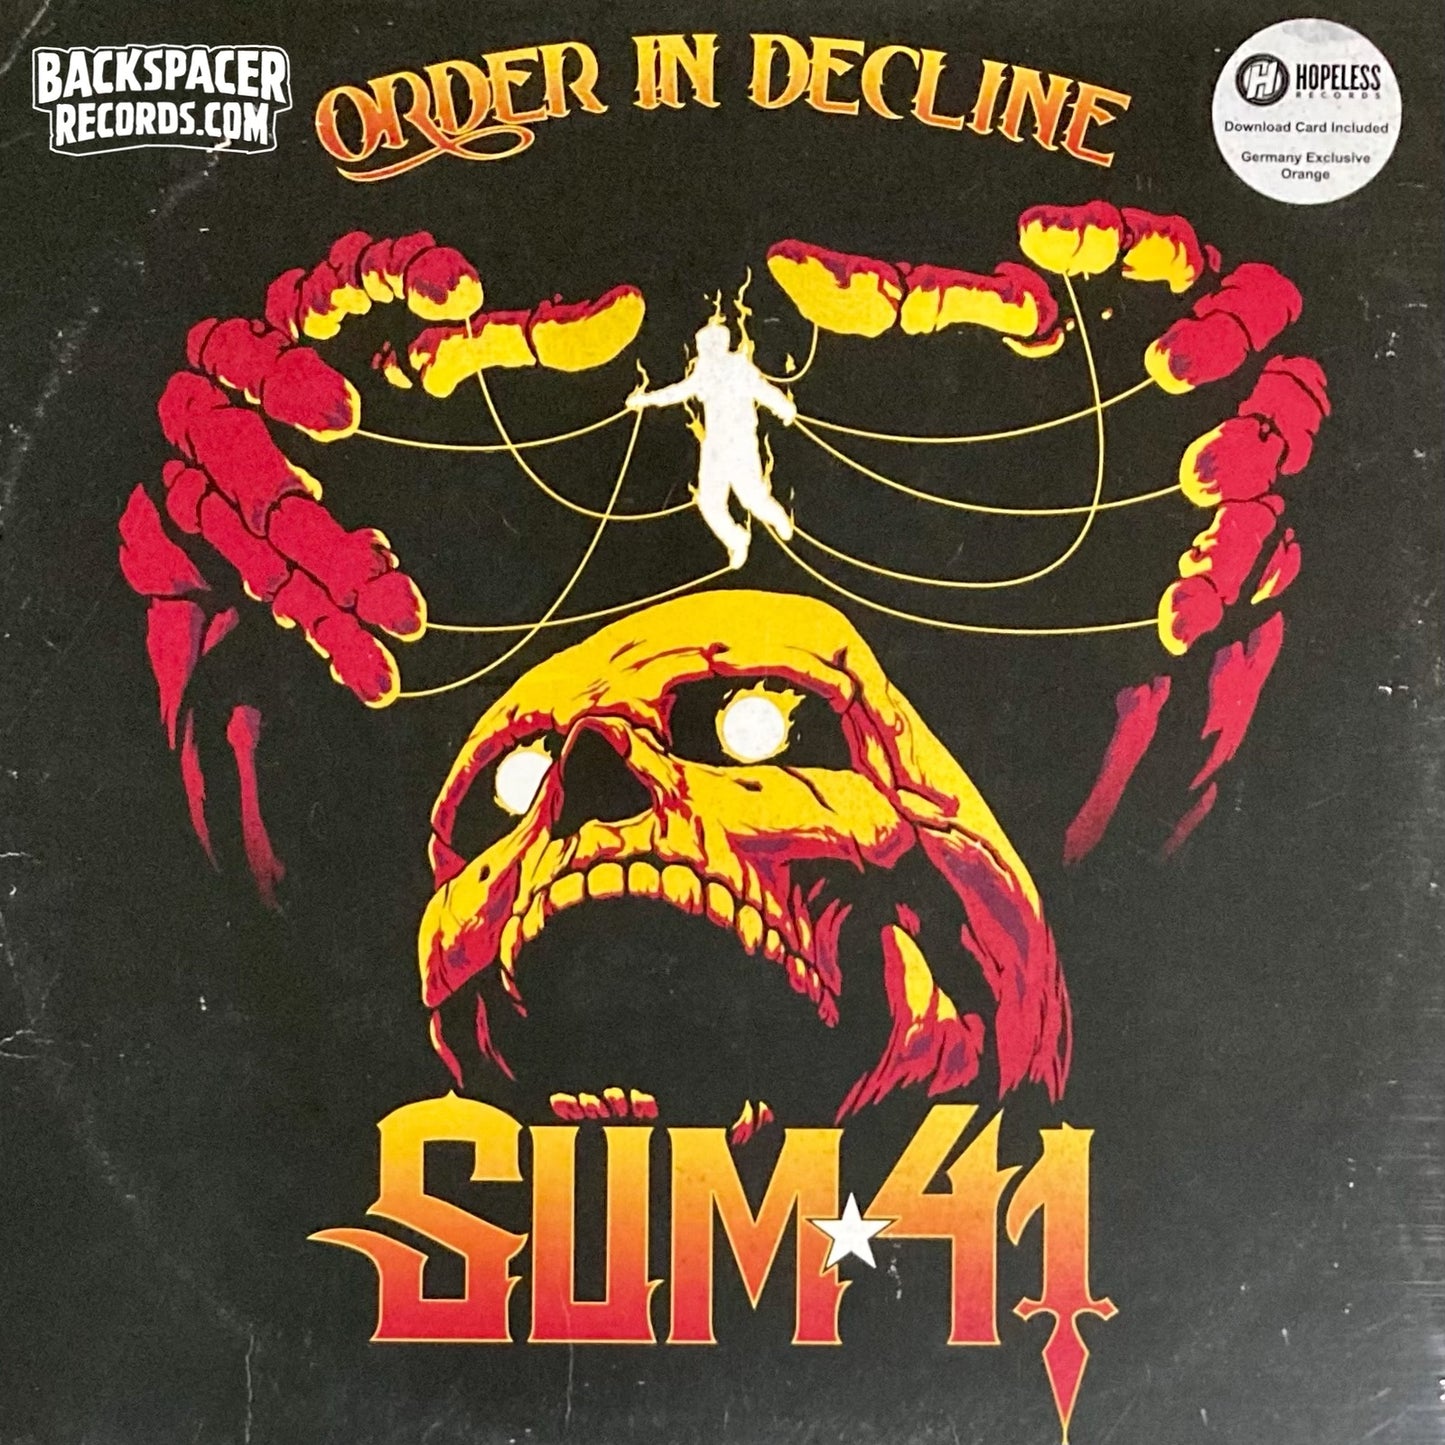 Sum 41 - Order In Decline (Limited Edition) LP (Sealed)